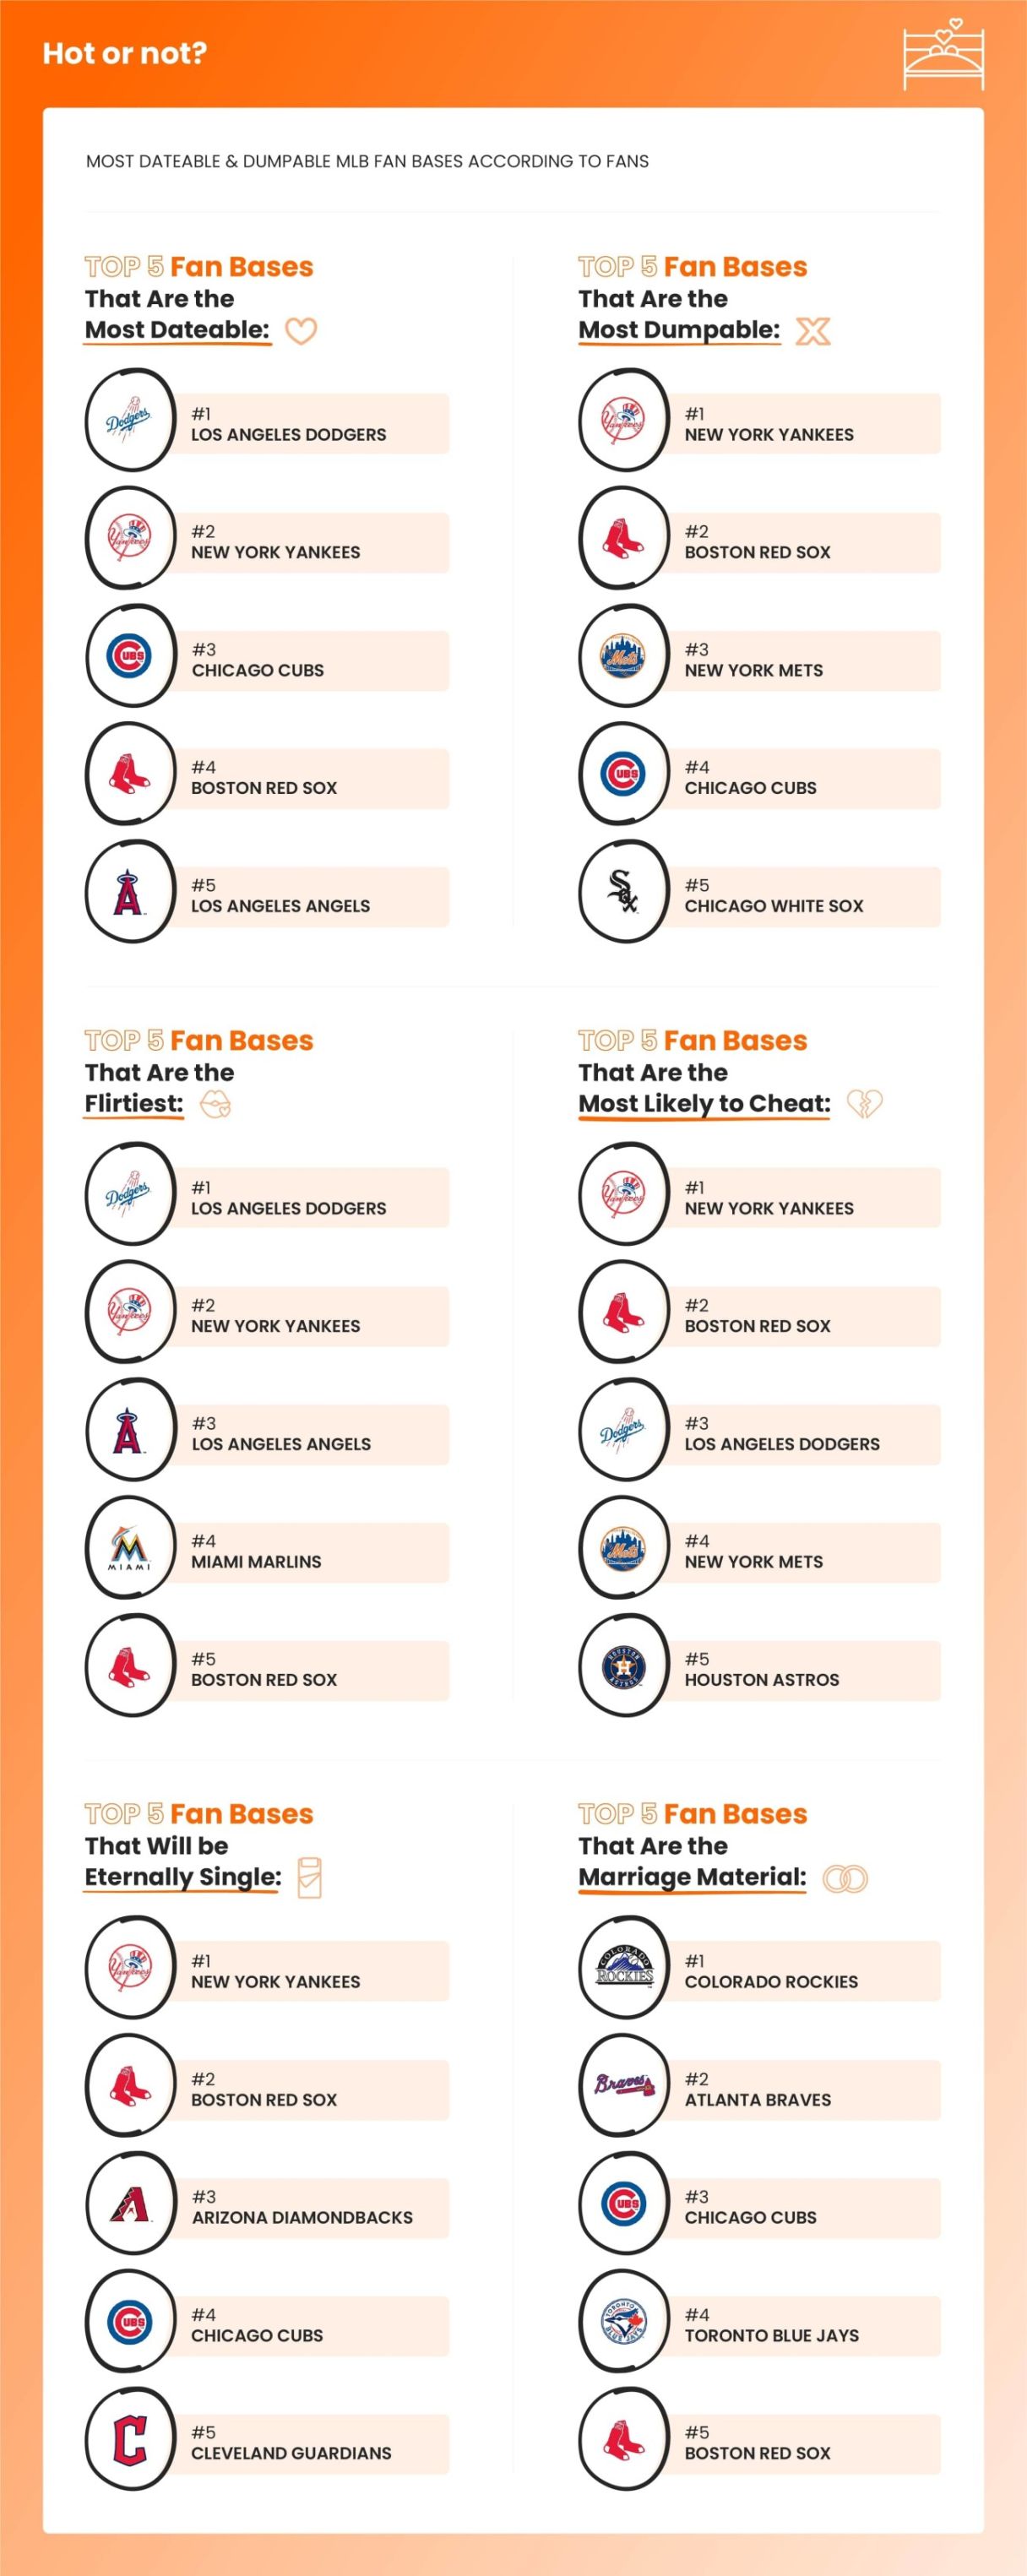 Content Marketing Infographic - Hot or not fanbases